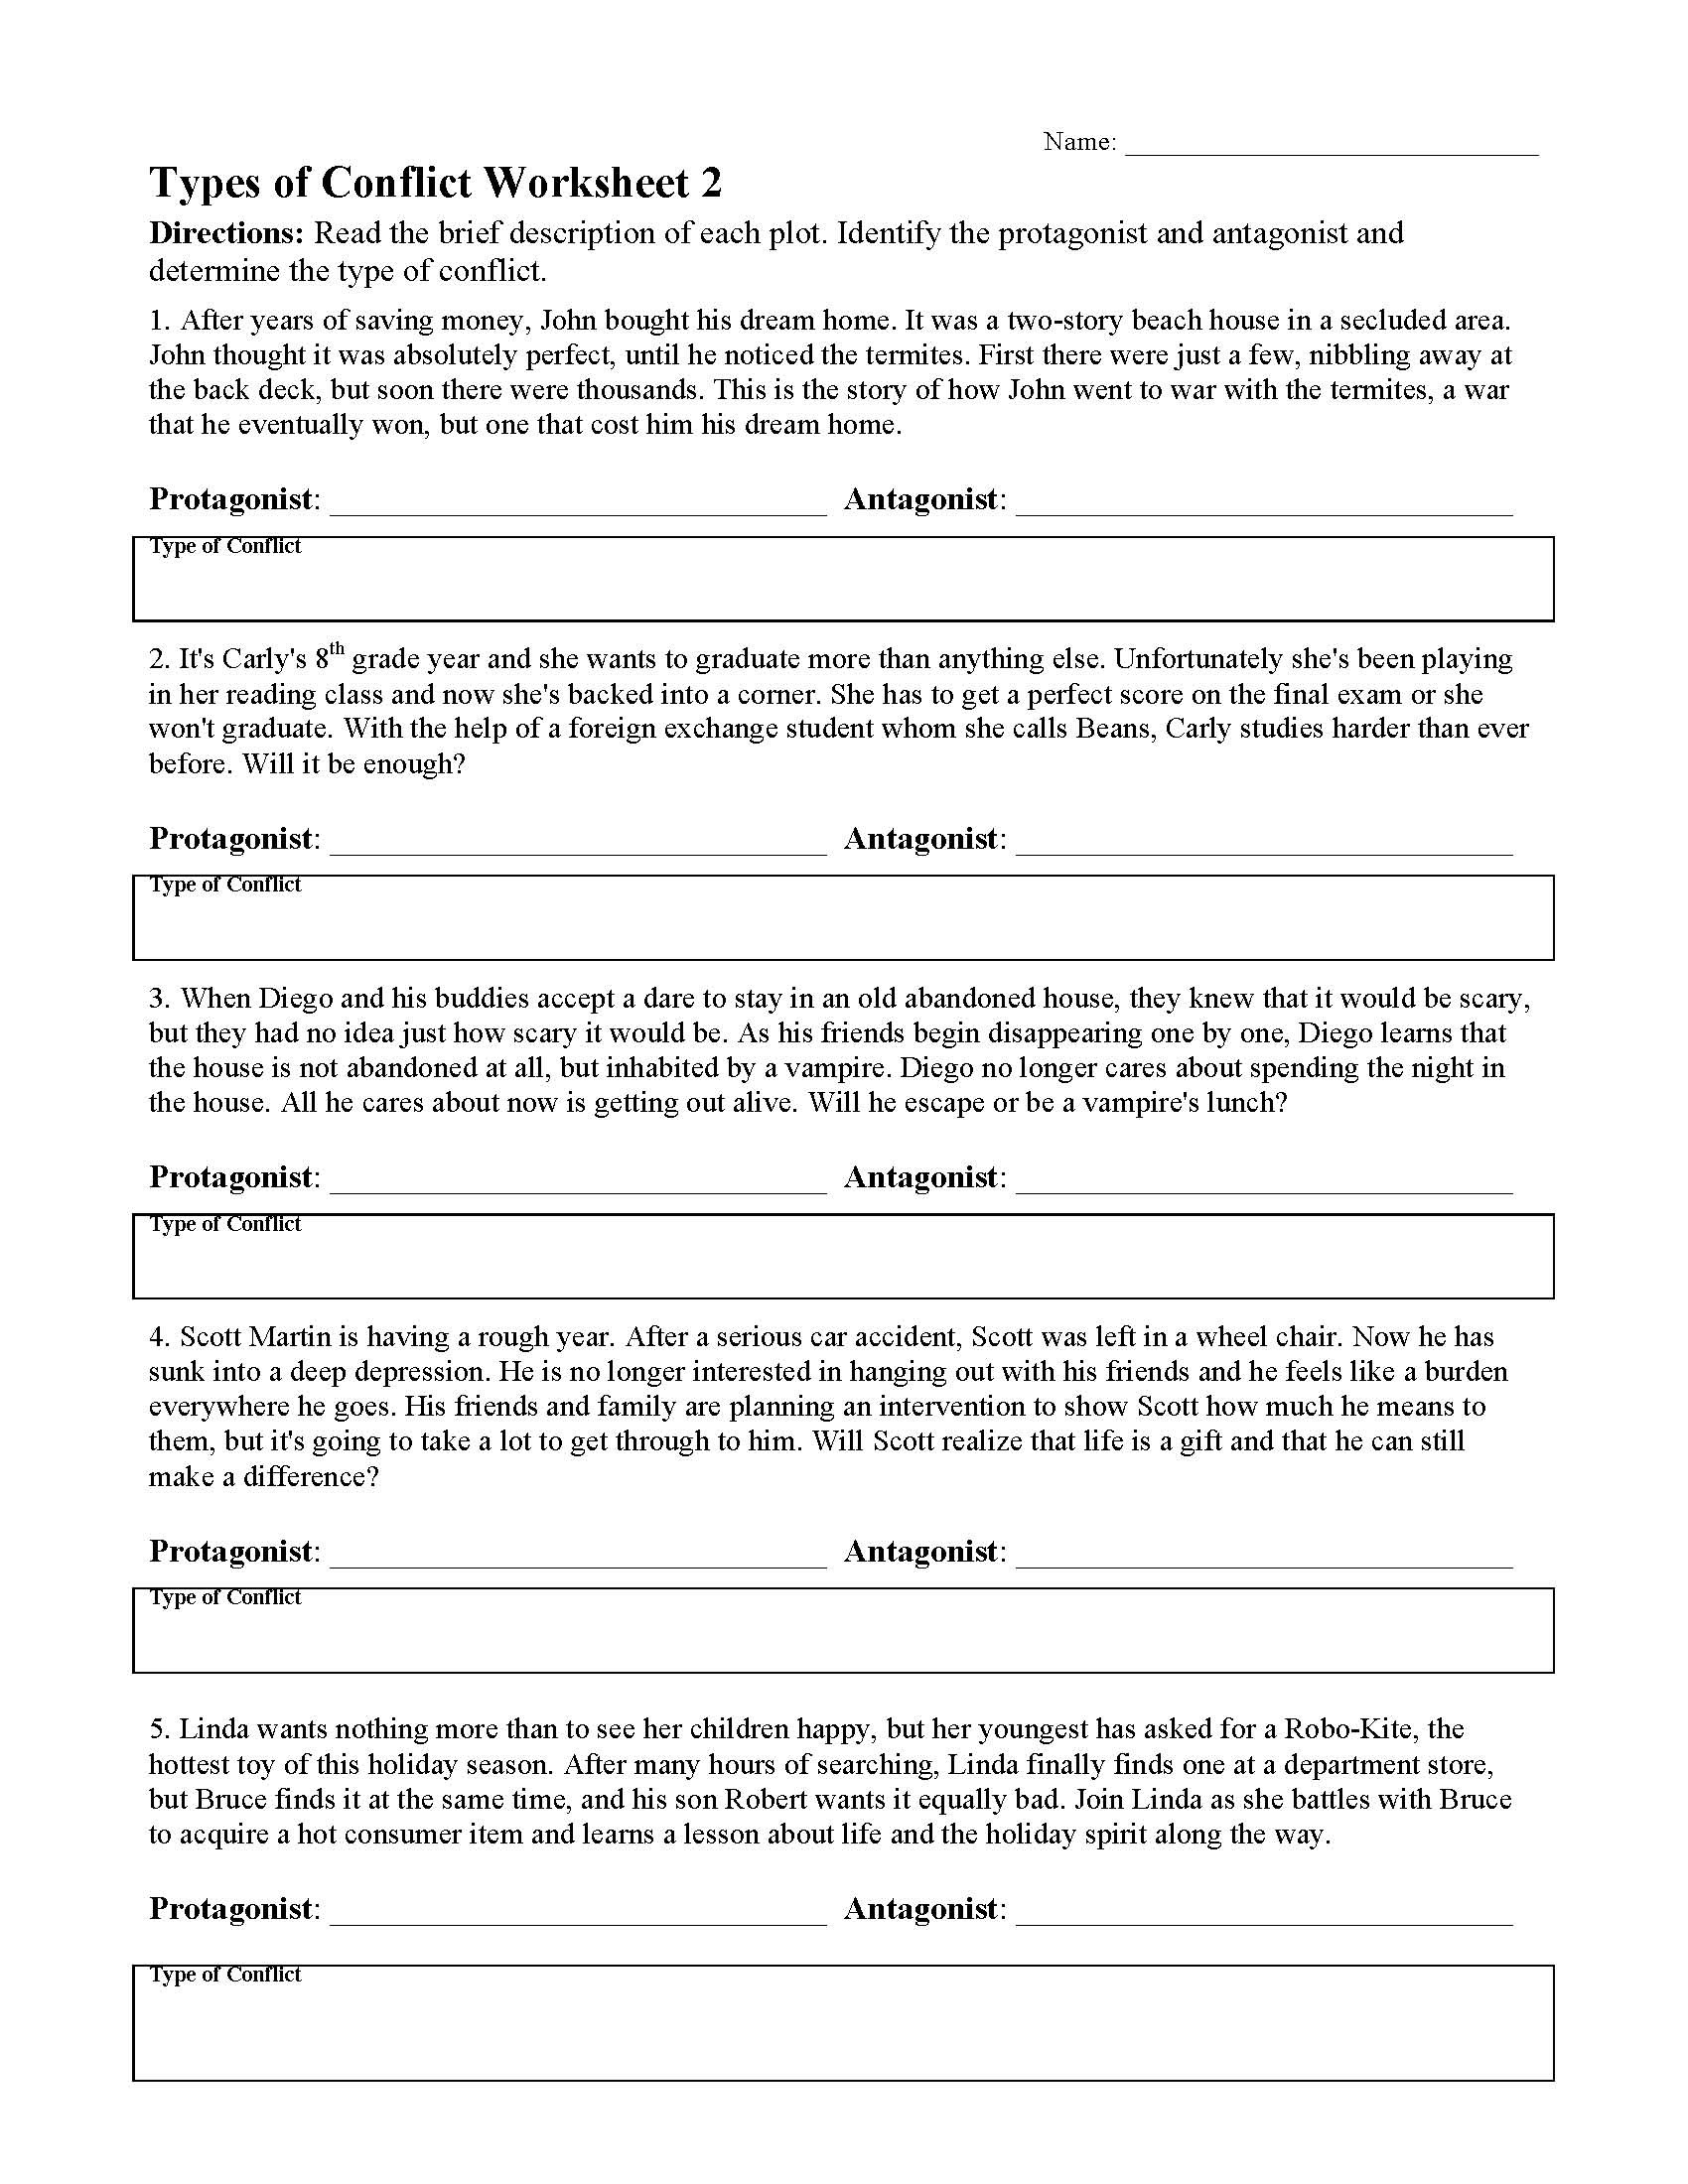 Types Of Conflict Worksheet Types Of Conflict Worksheet 2